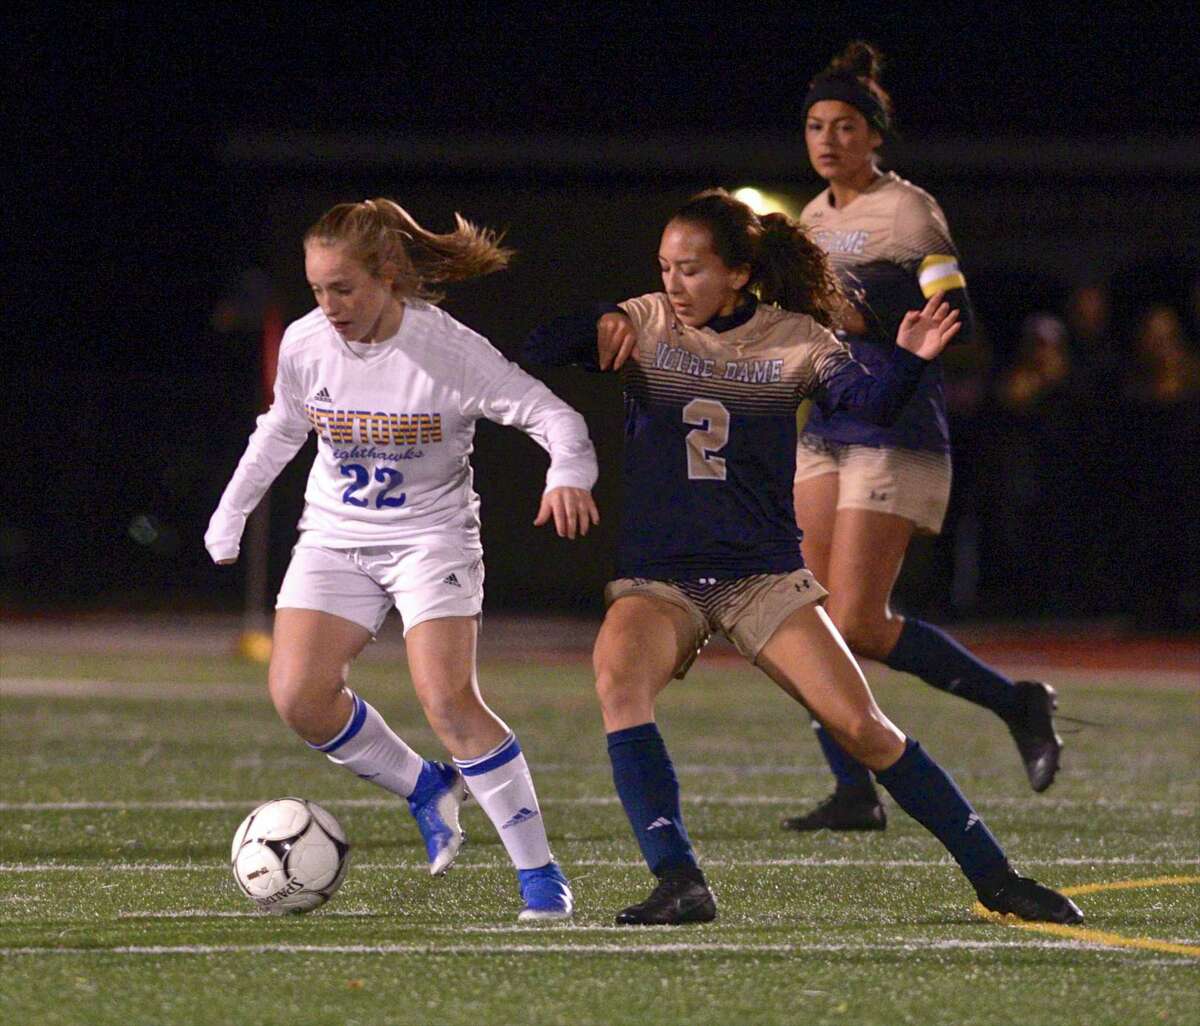 Newtown's Katie Rowan (22) and Notre Dame-Fairfield's Mackenzie Ledford (2) turn on the ball in the SWC girls soccer final between No.2 Notre Dame-Fairfield and No. 5 Newtown. Wednesday, November 6, 2019, at Joel Barlow High School, Redding, Conn.